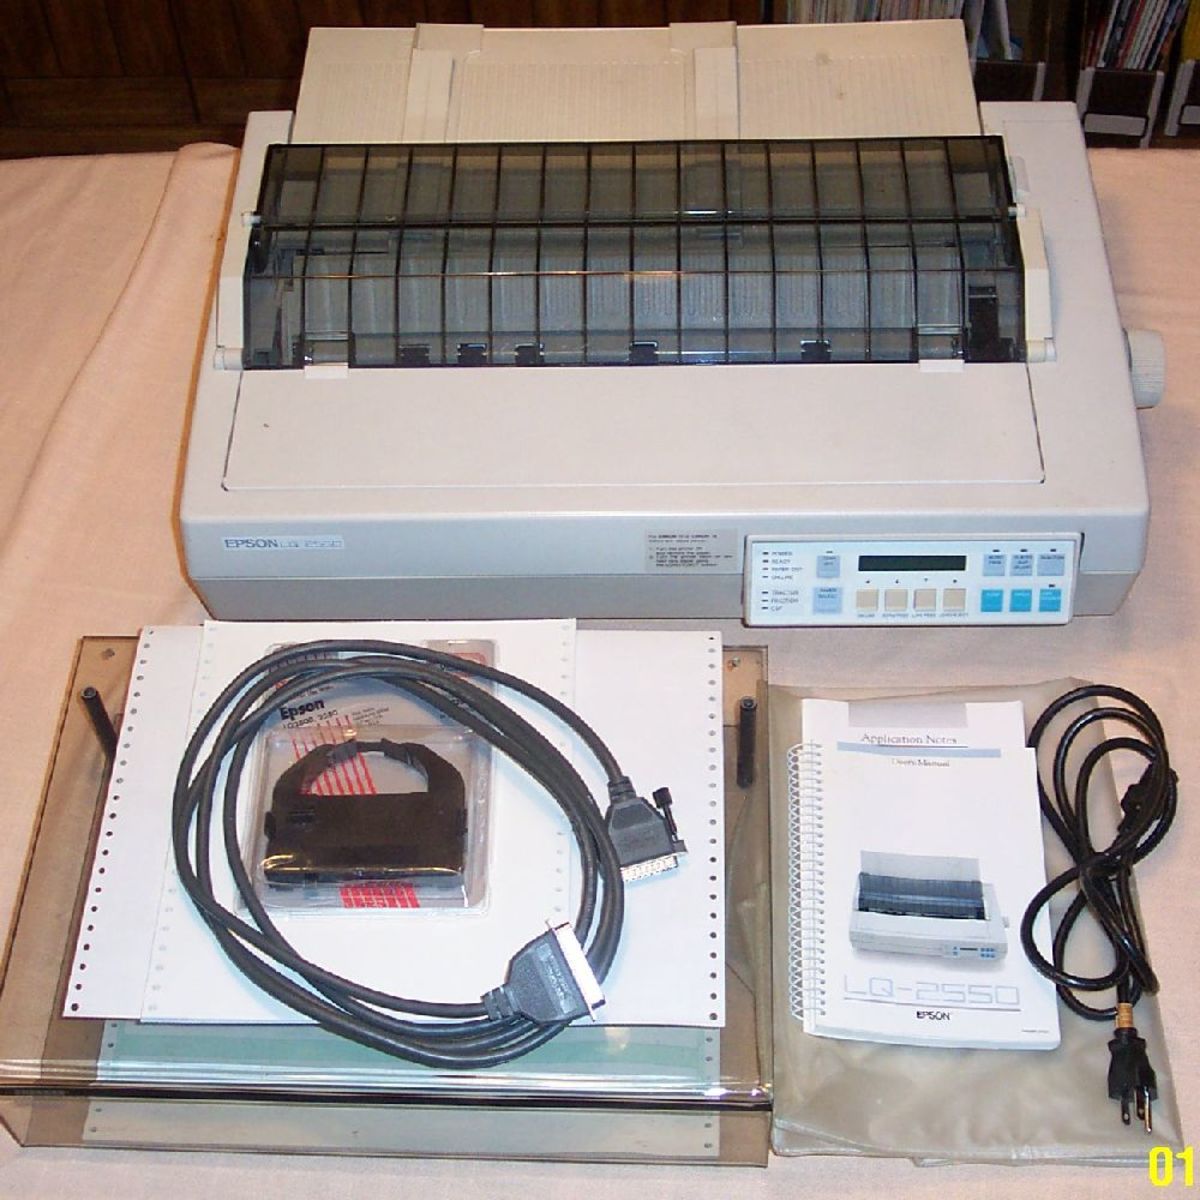 Printer drivers often come on the CDs provided with a new printer. 